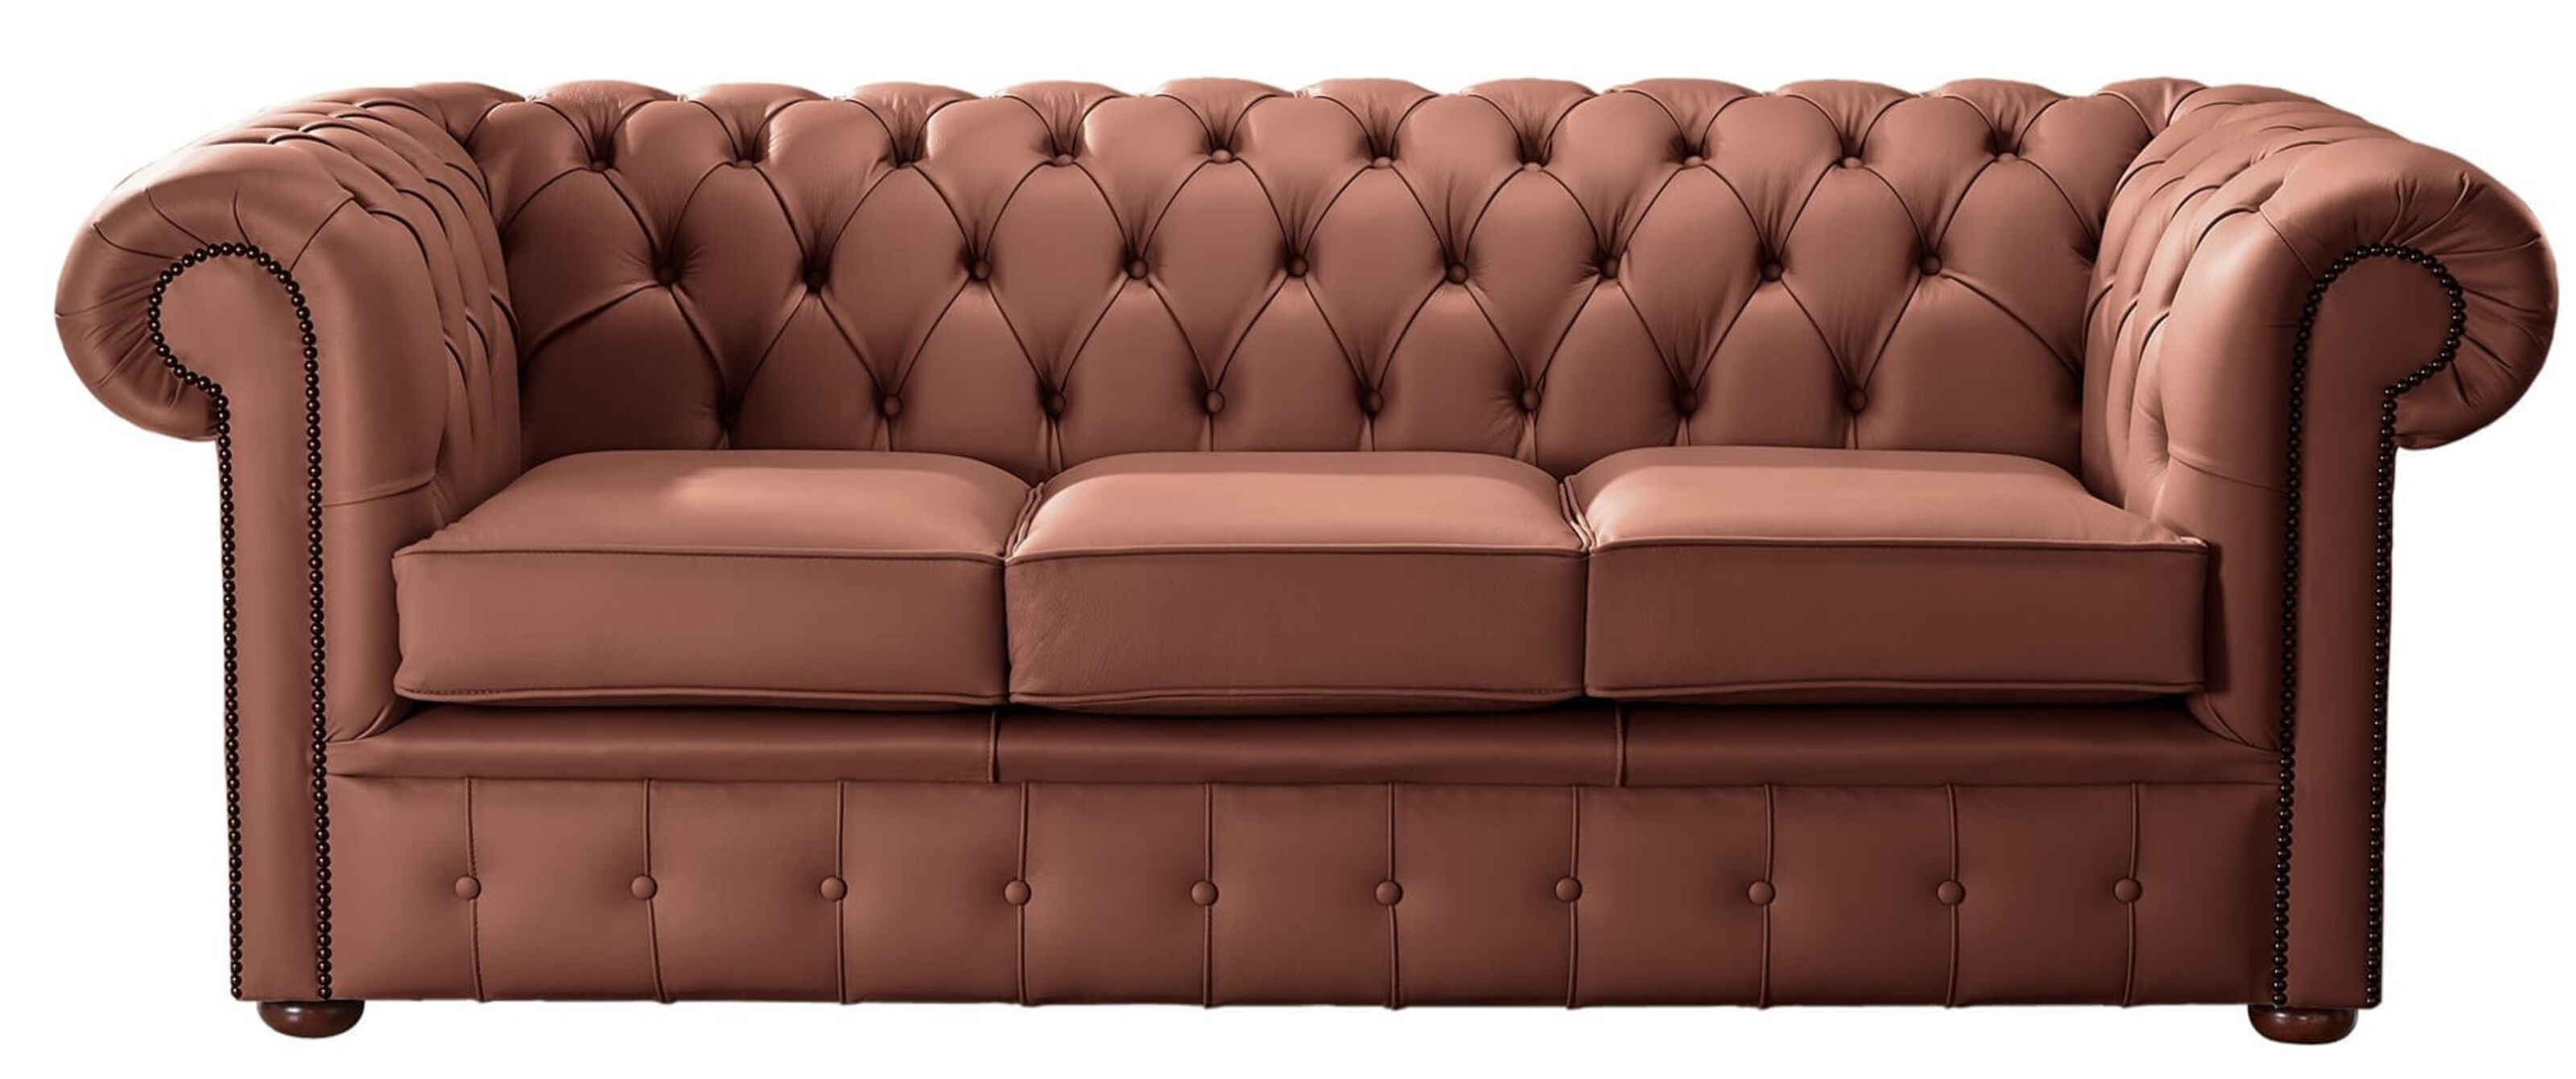 Discover the Charm of Leather Chesterfield Furniture in Manchester  %Post Title